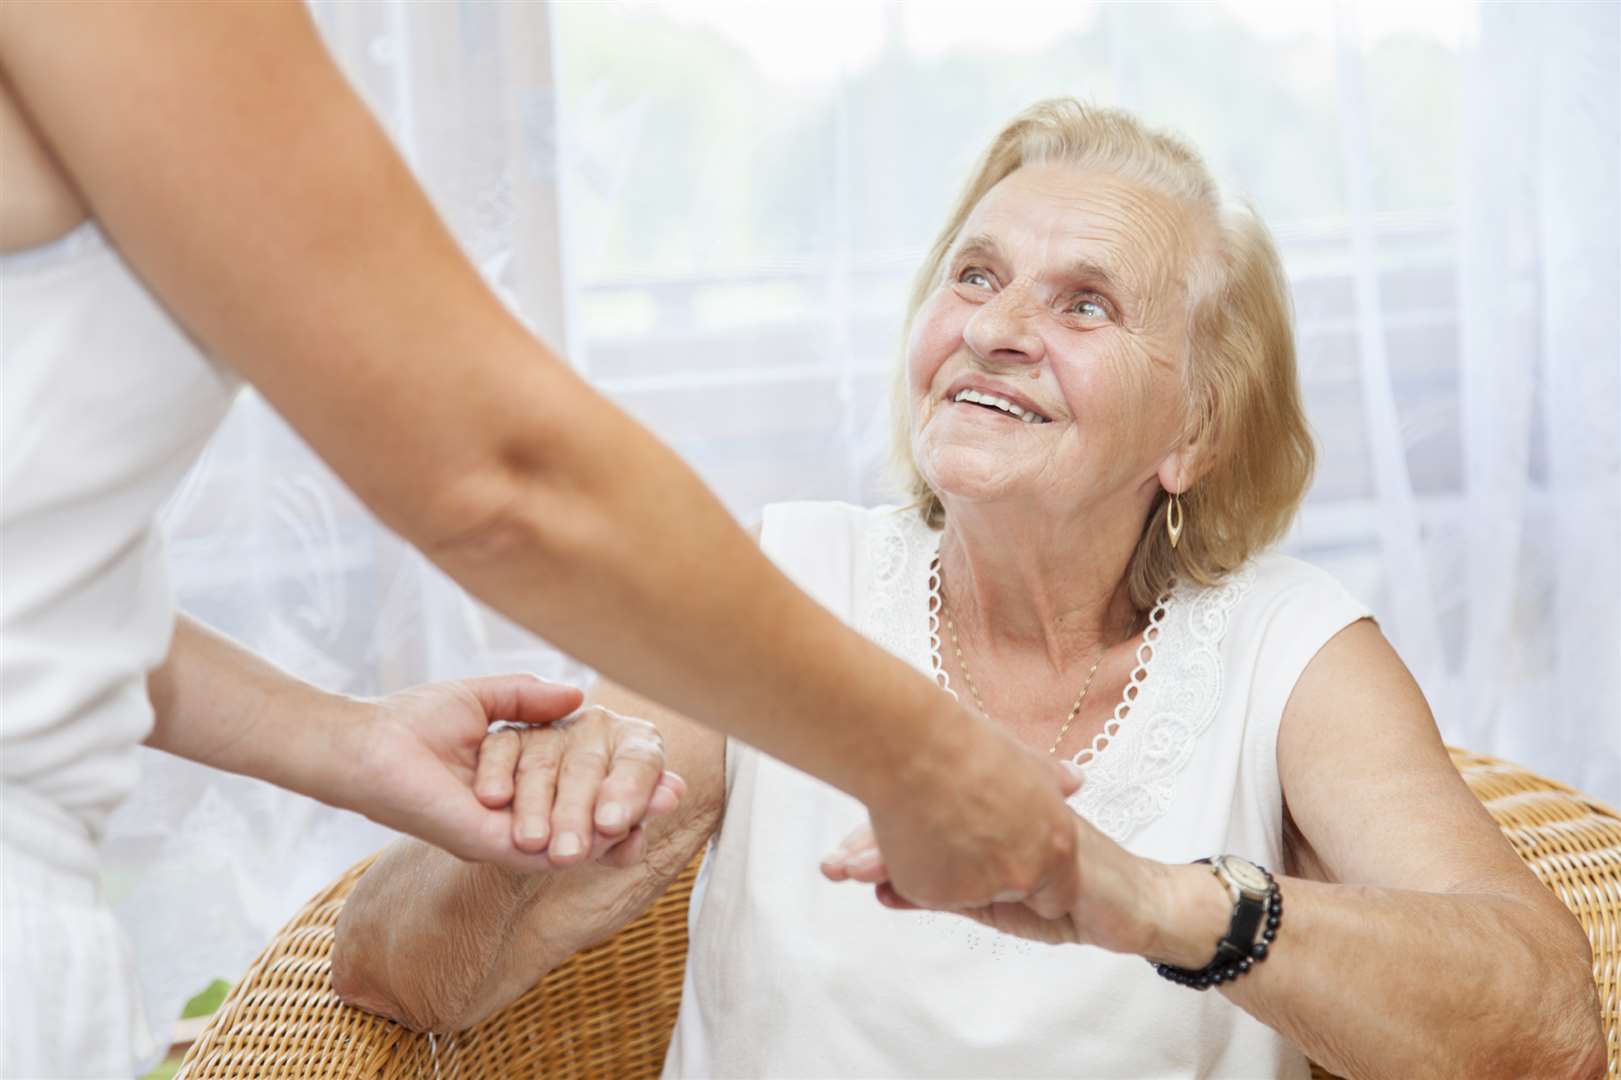 The women worked to improve care for frail patients. Stock image